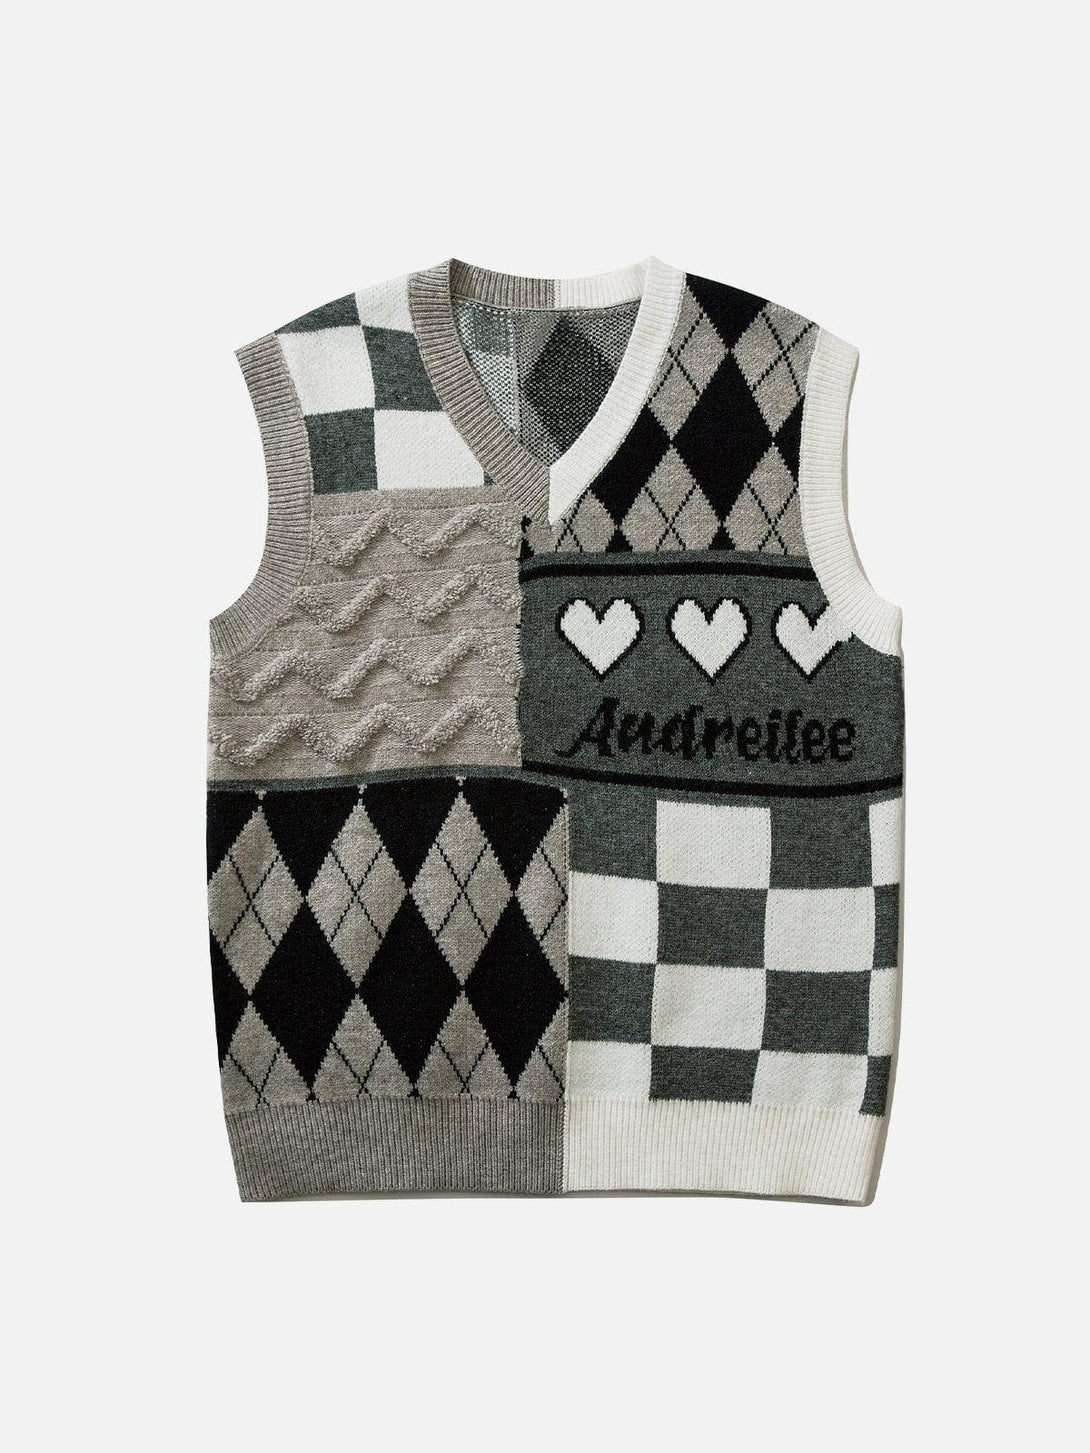 Levefly - Love Weaving Layering Style Sweater Vest - Streetwear Fashion - levefly.com